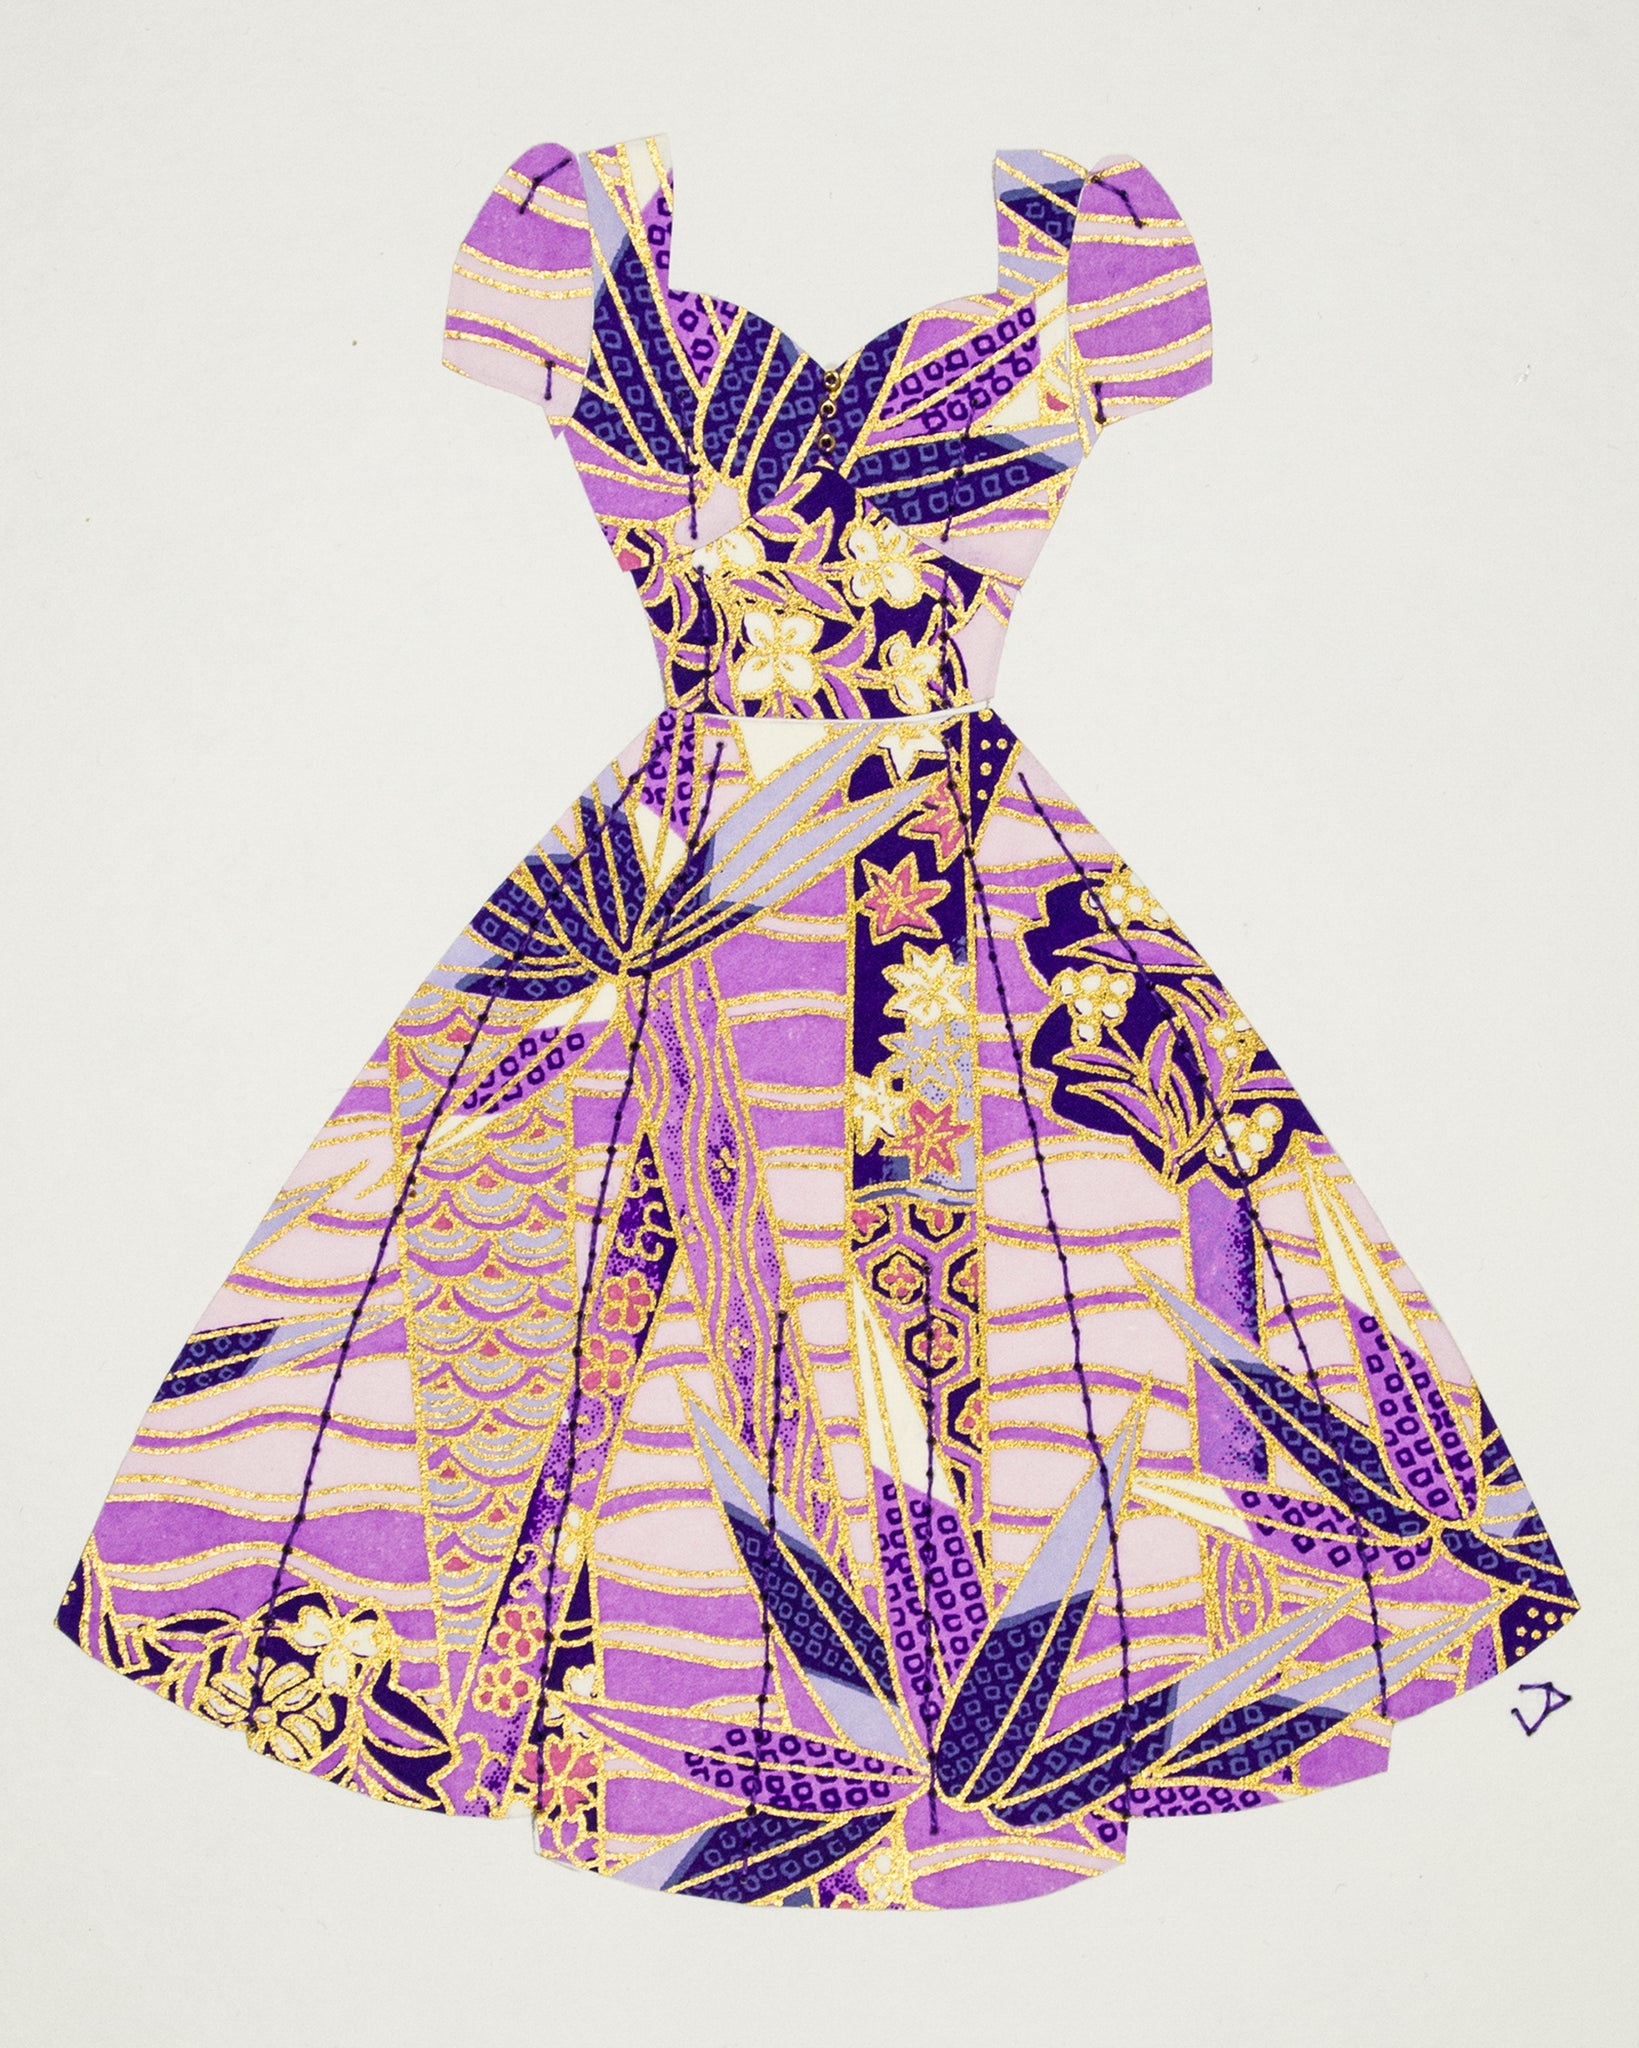 Pinup #016: Pinup dress in purple bamboo. 2019